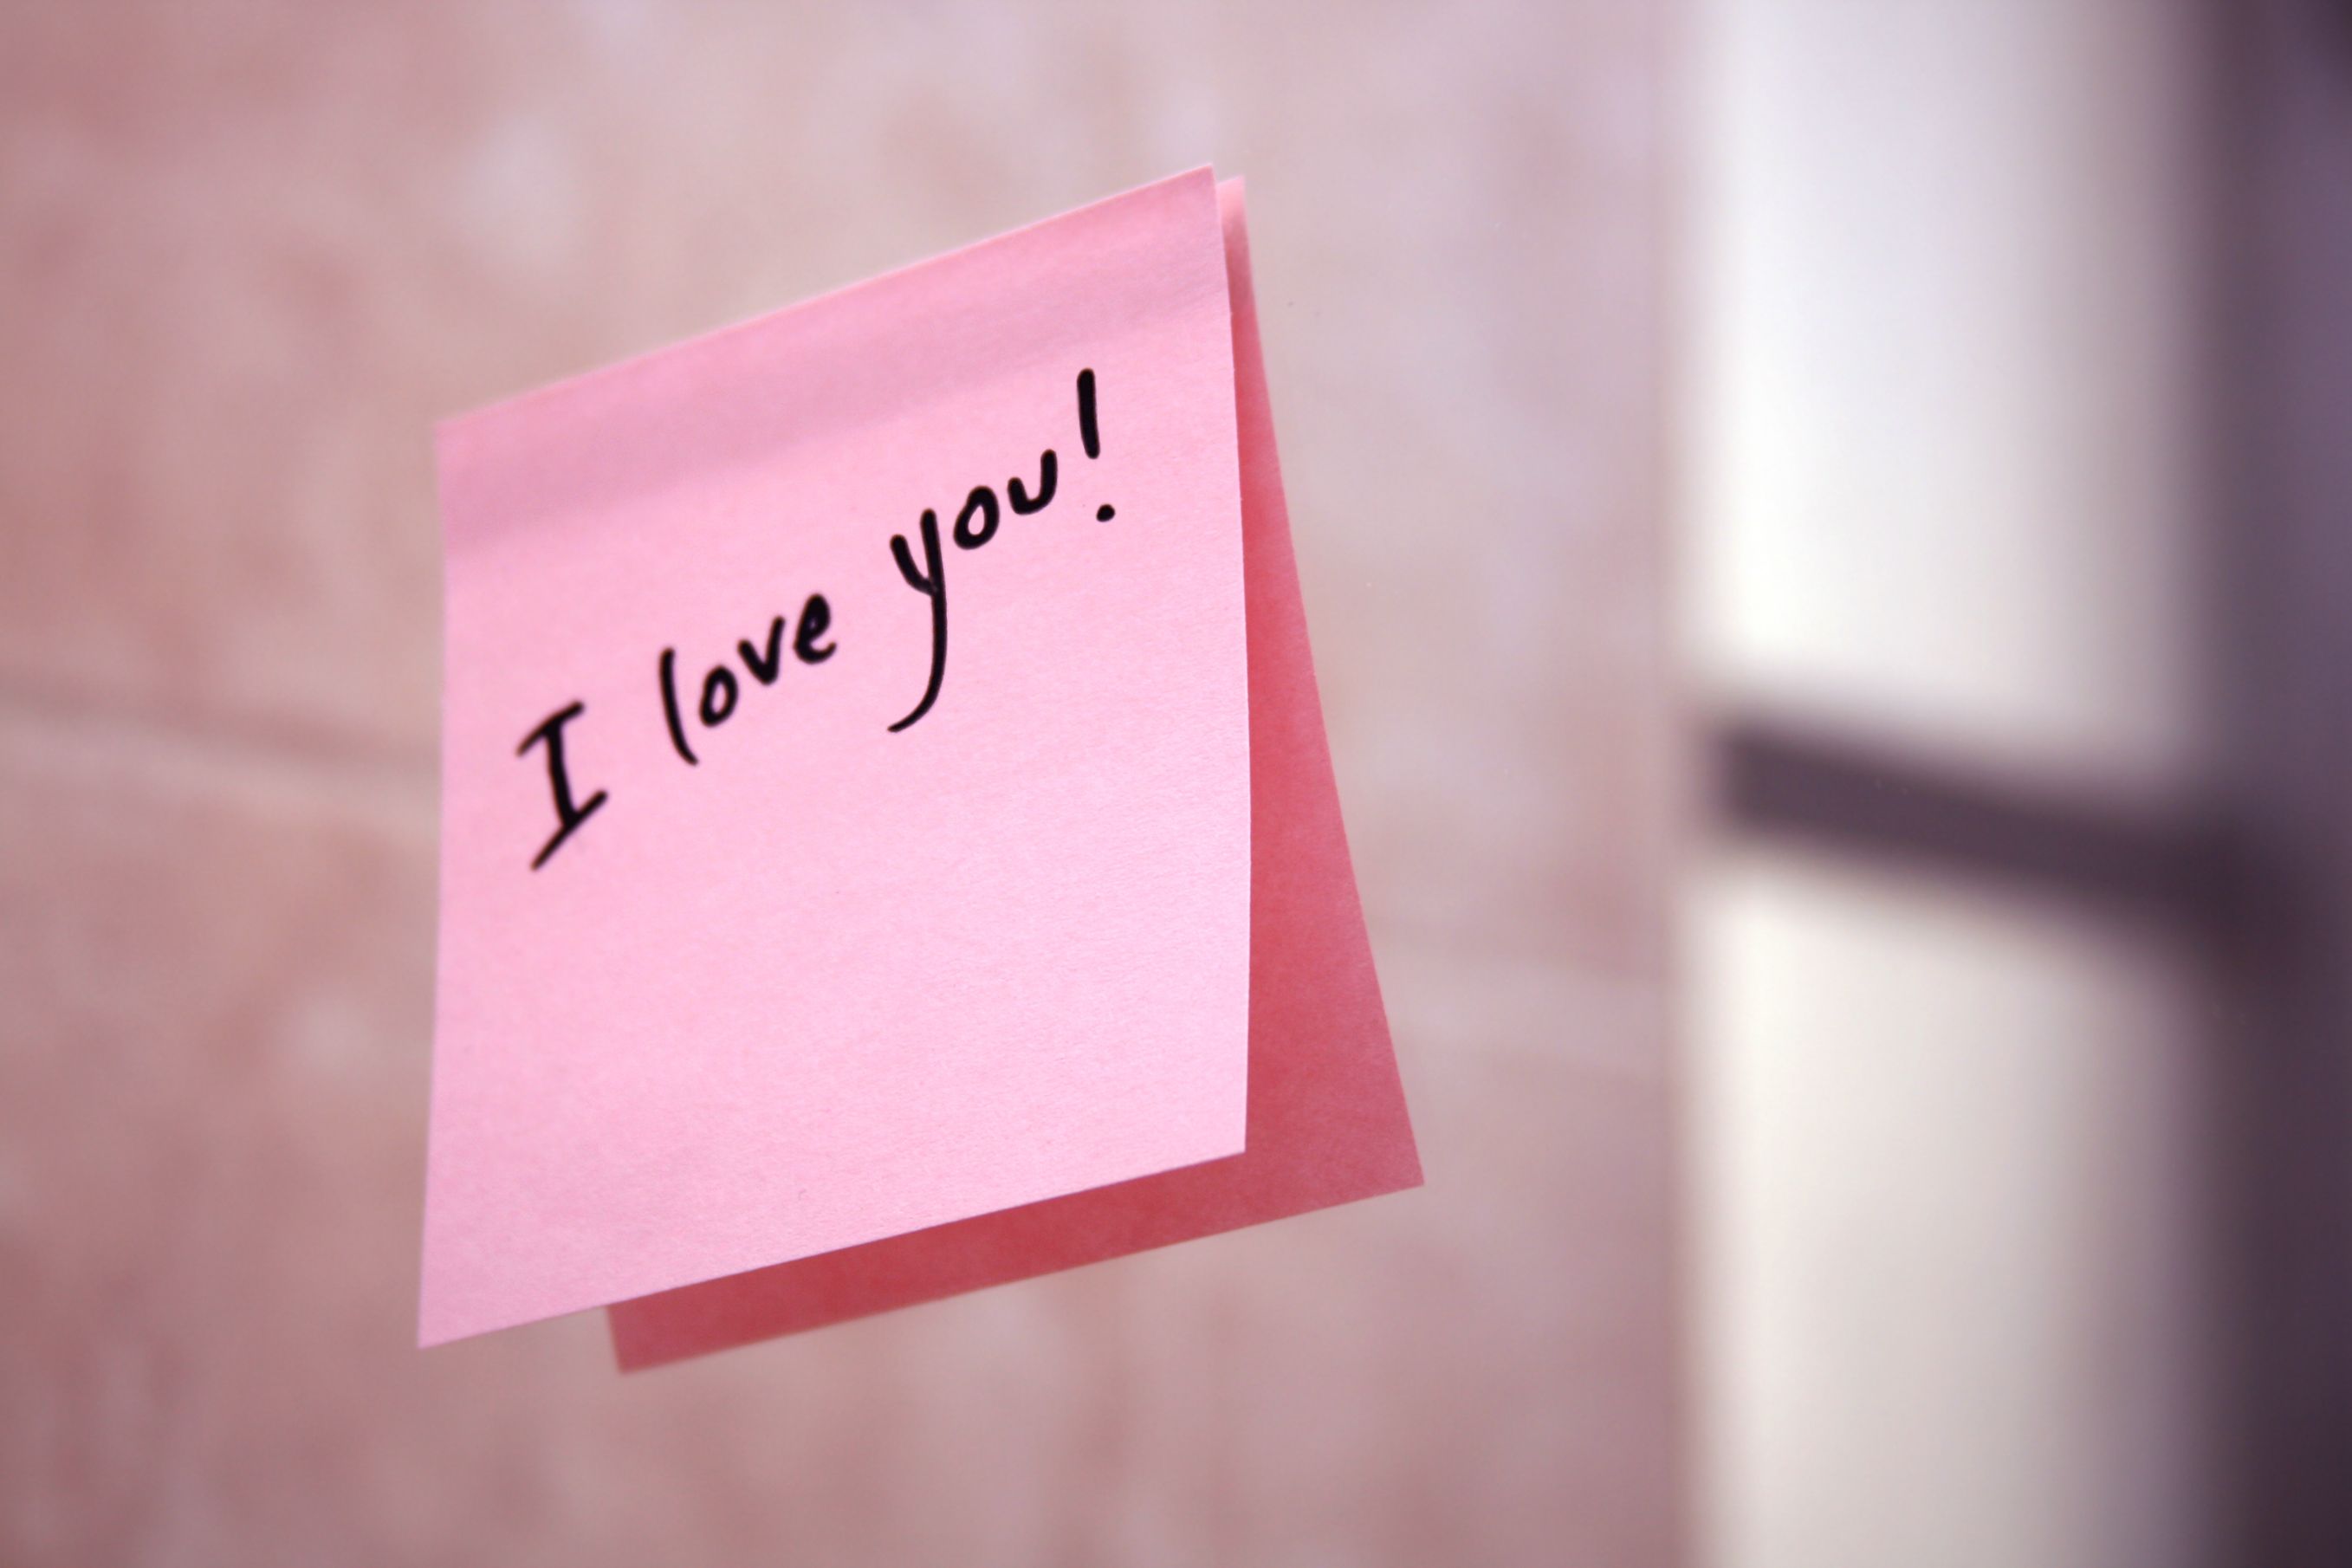 I love you pink post it note stuck to the wall